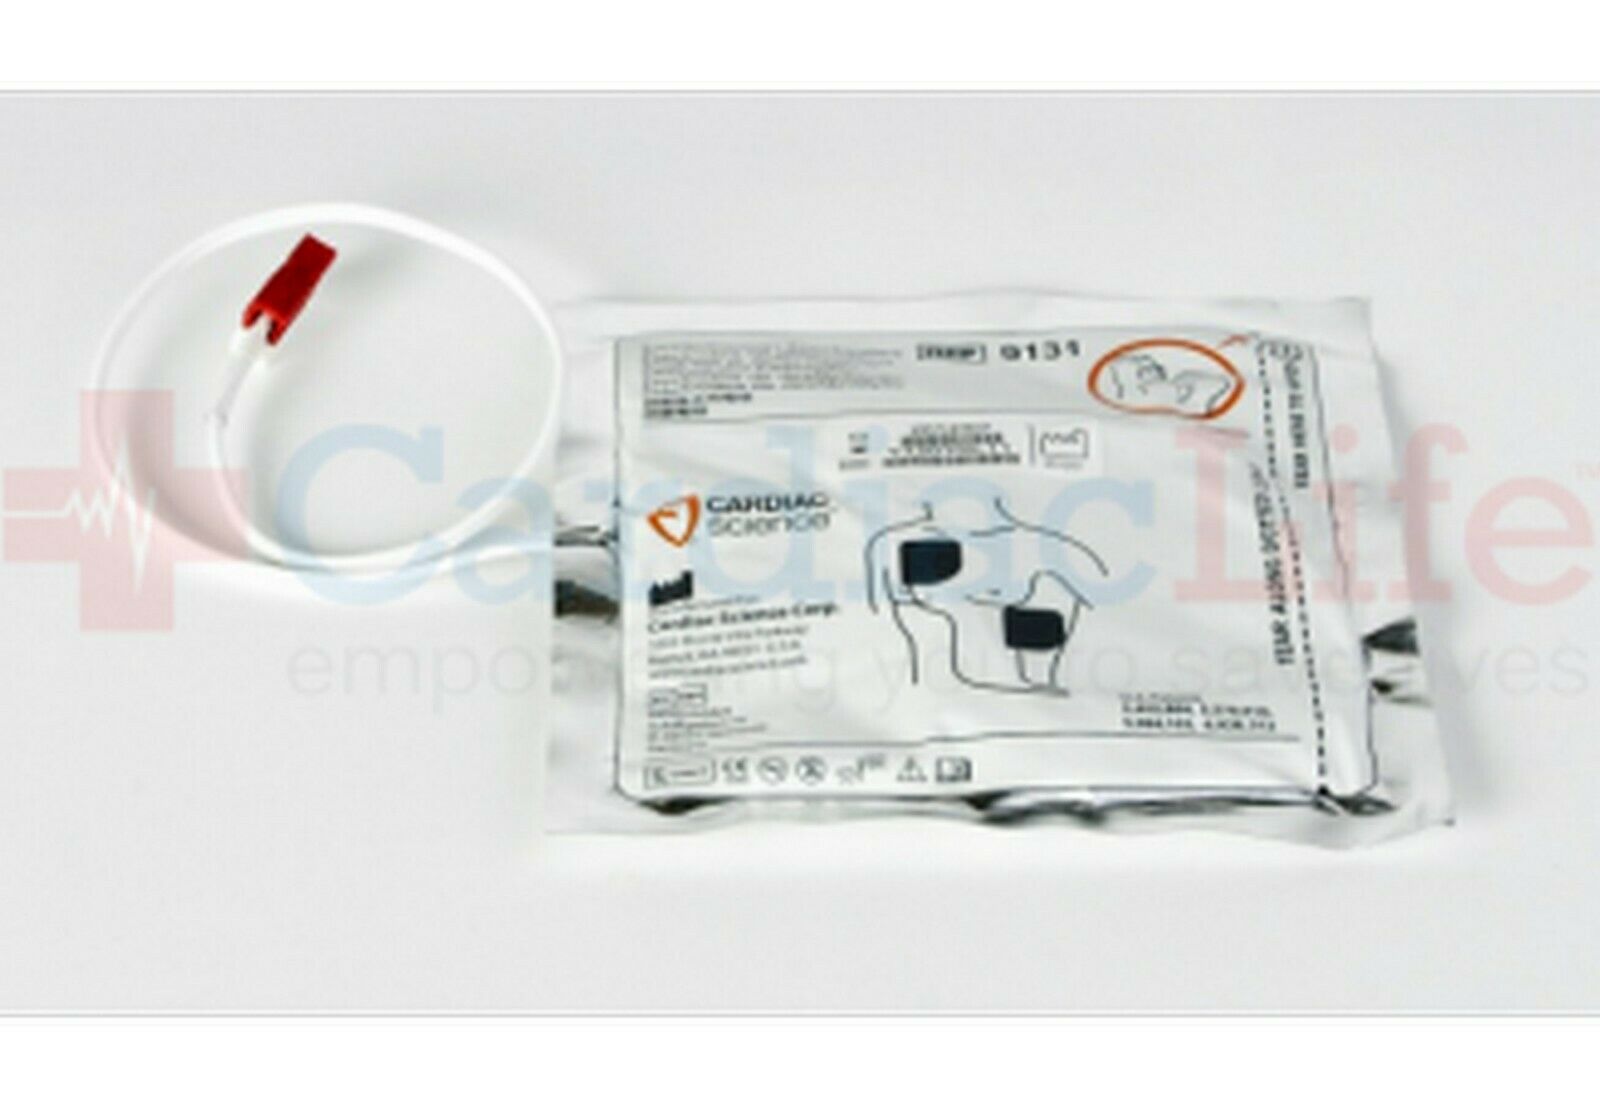 Cardiac Science Adult AED Electrodes 9131-001